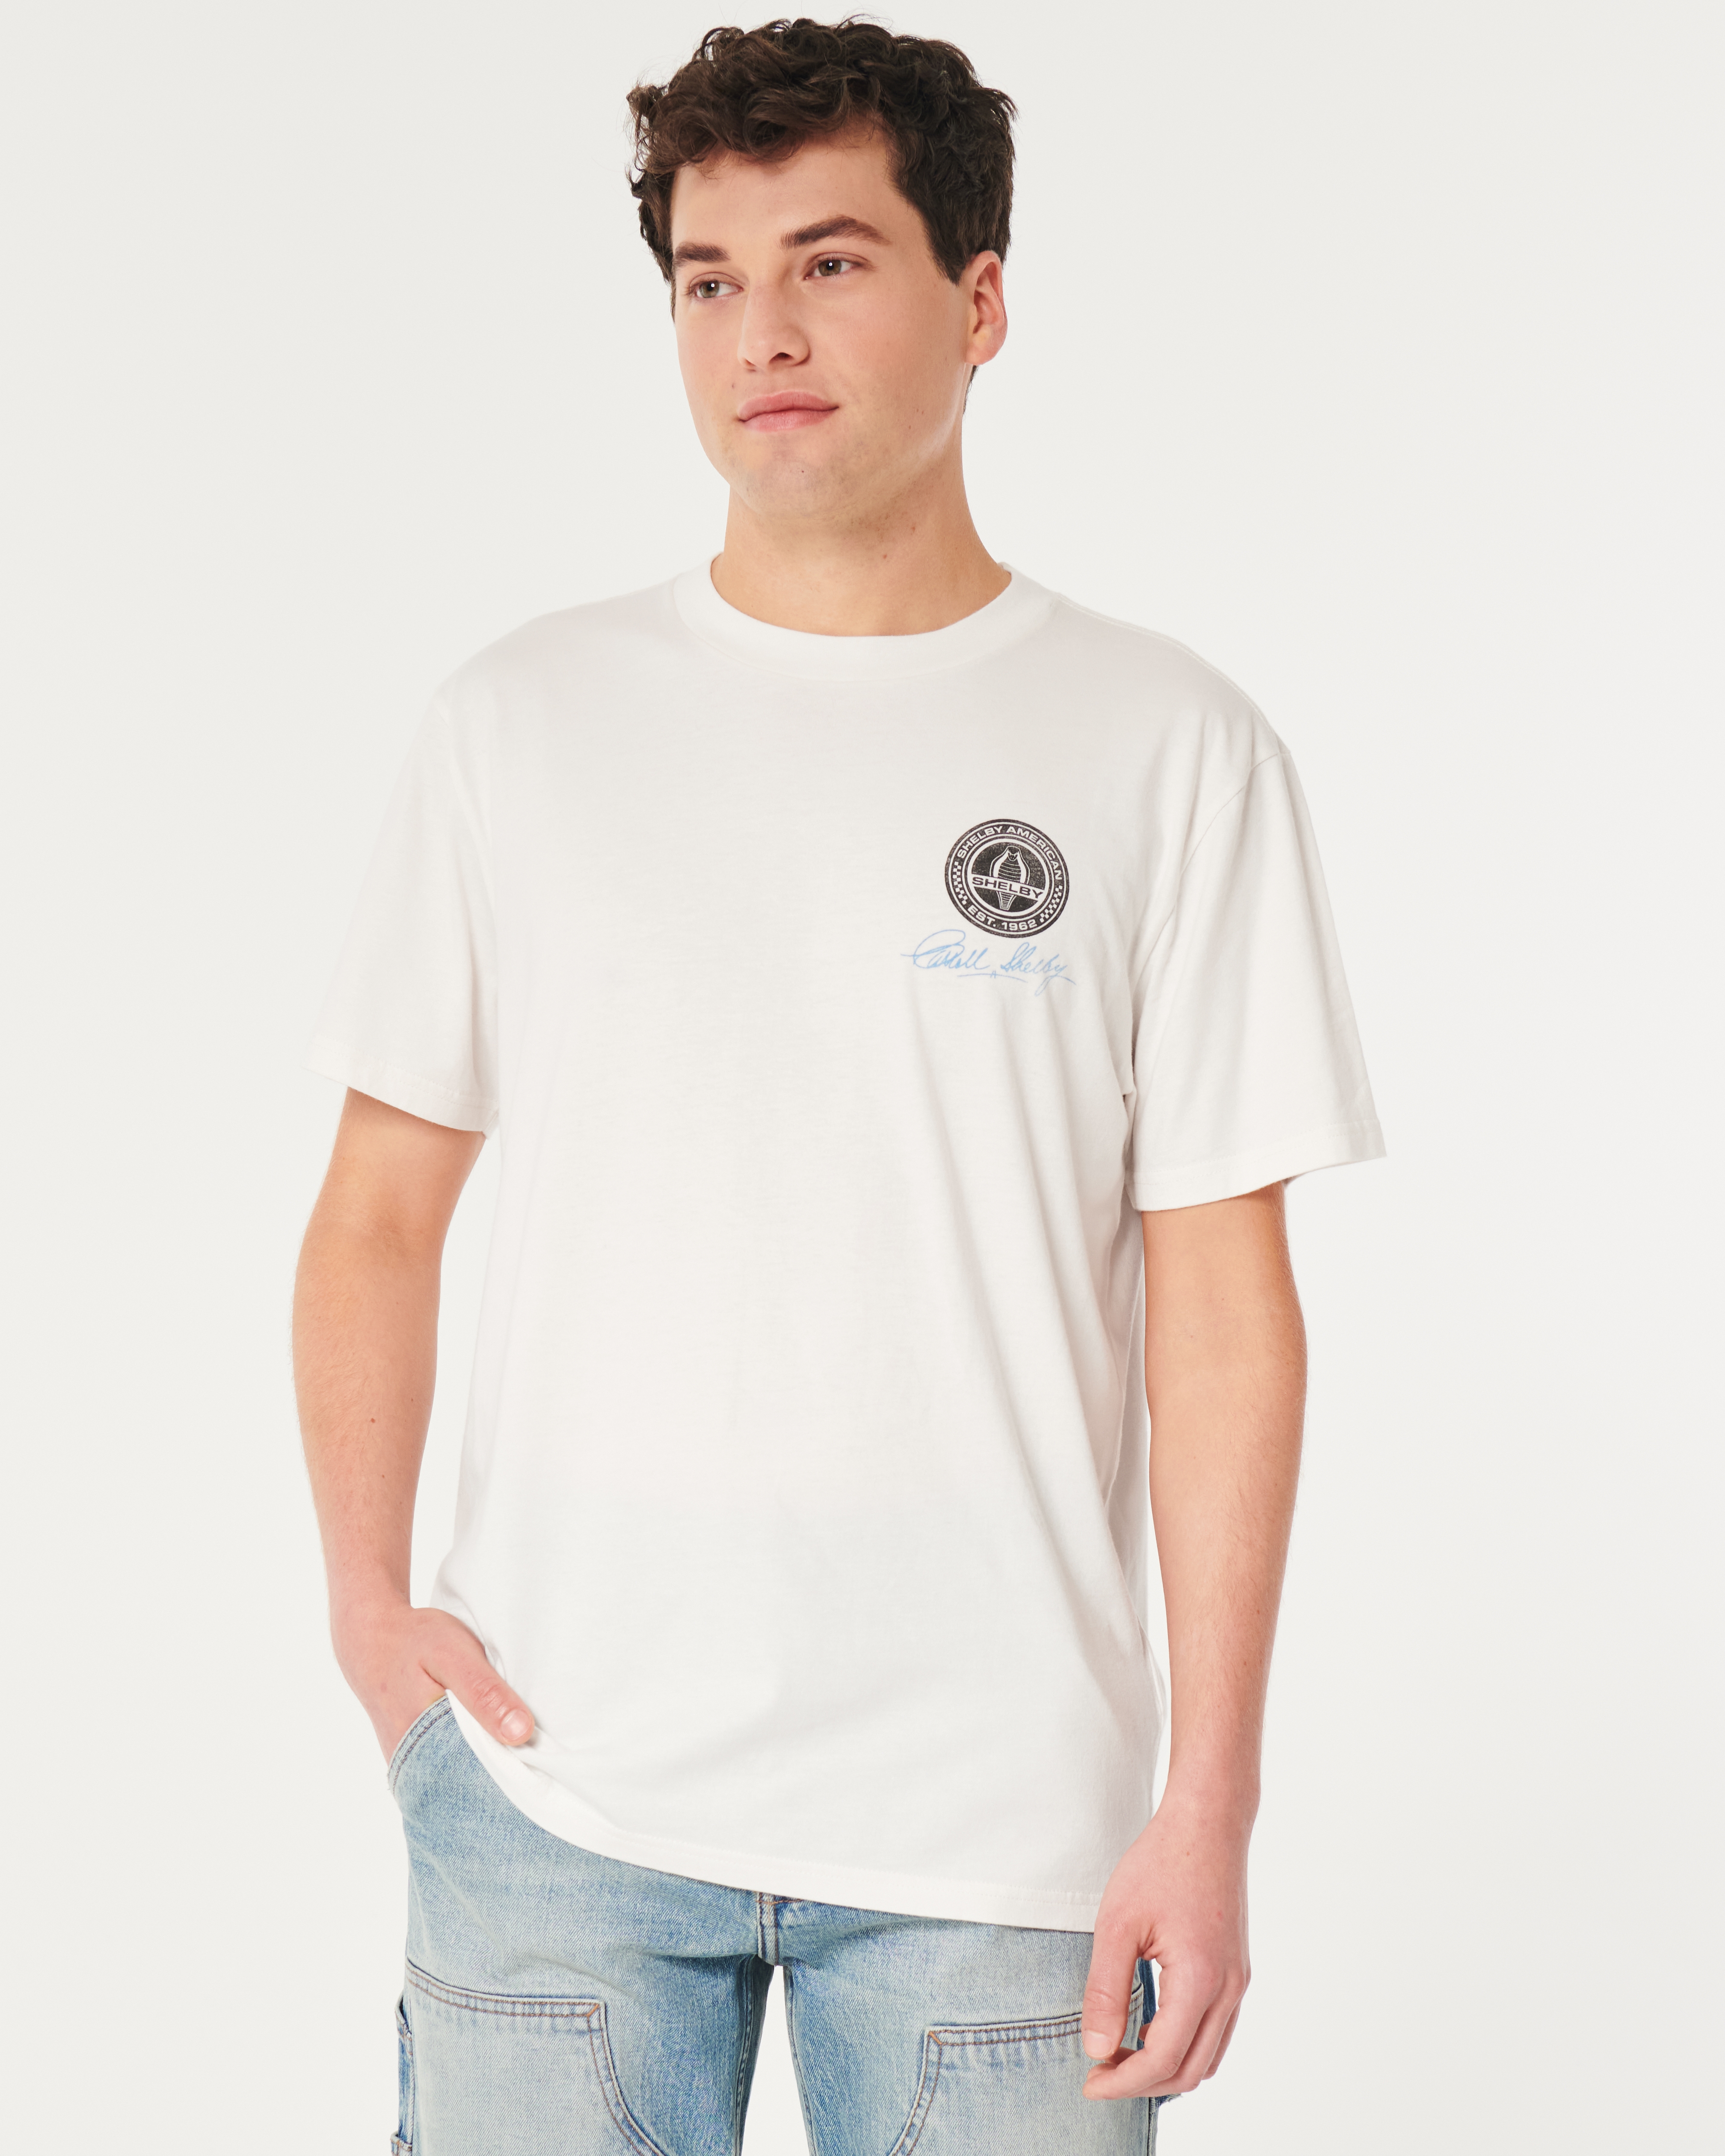 Men's Relaxed Shelby Car Graphic Tee | Men's Tops | HollisterCo.ca